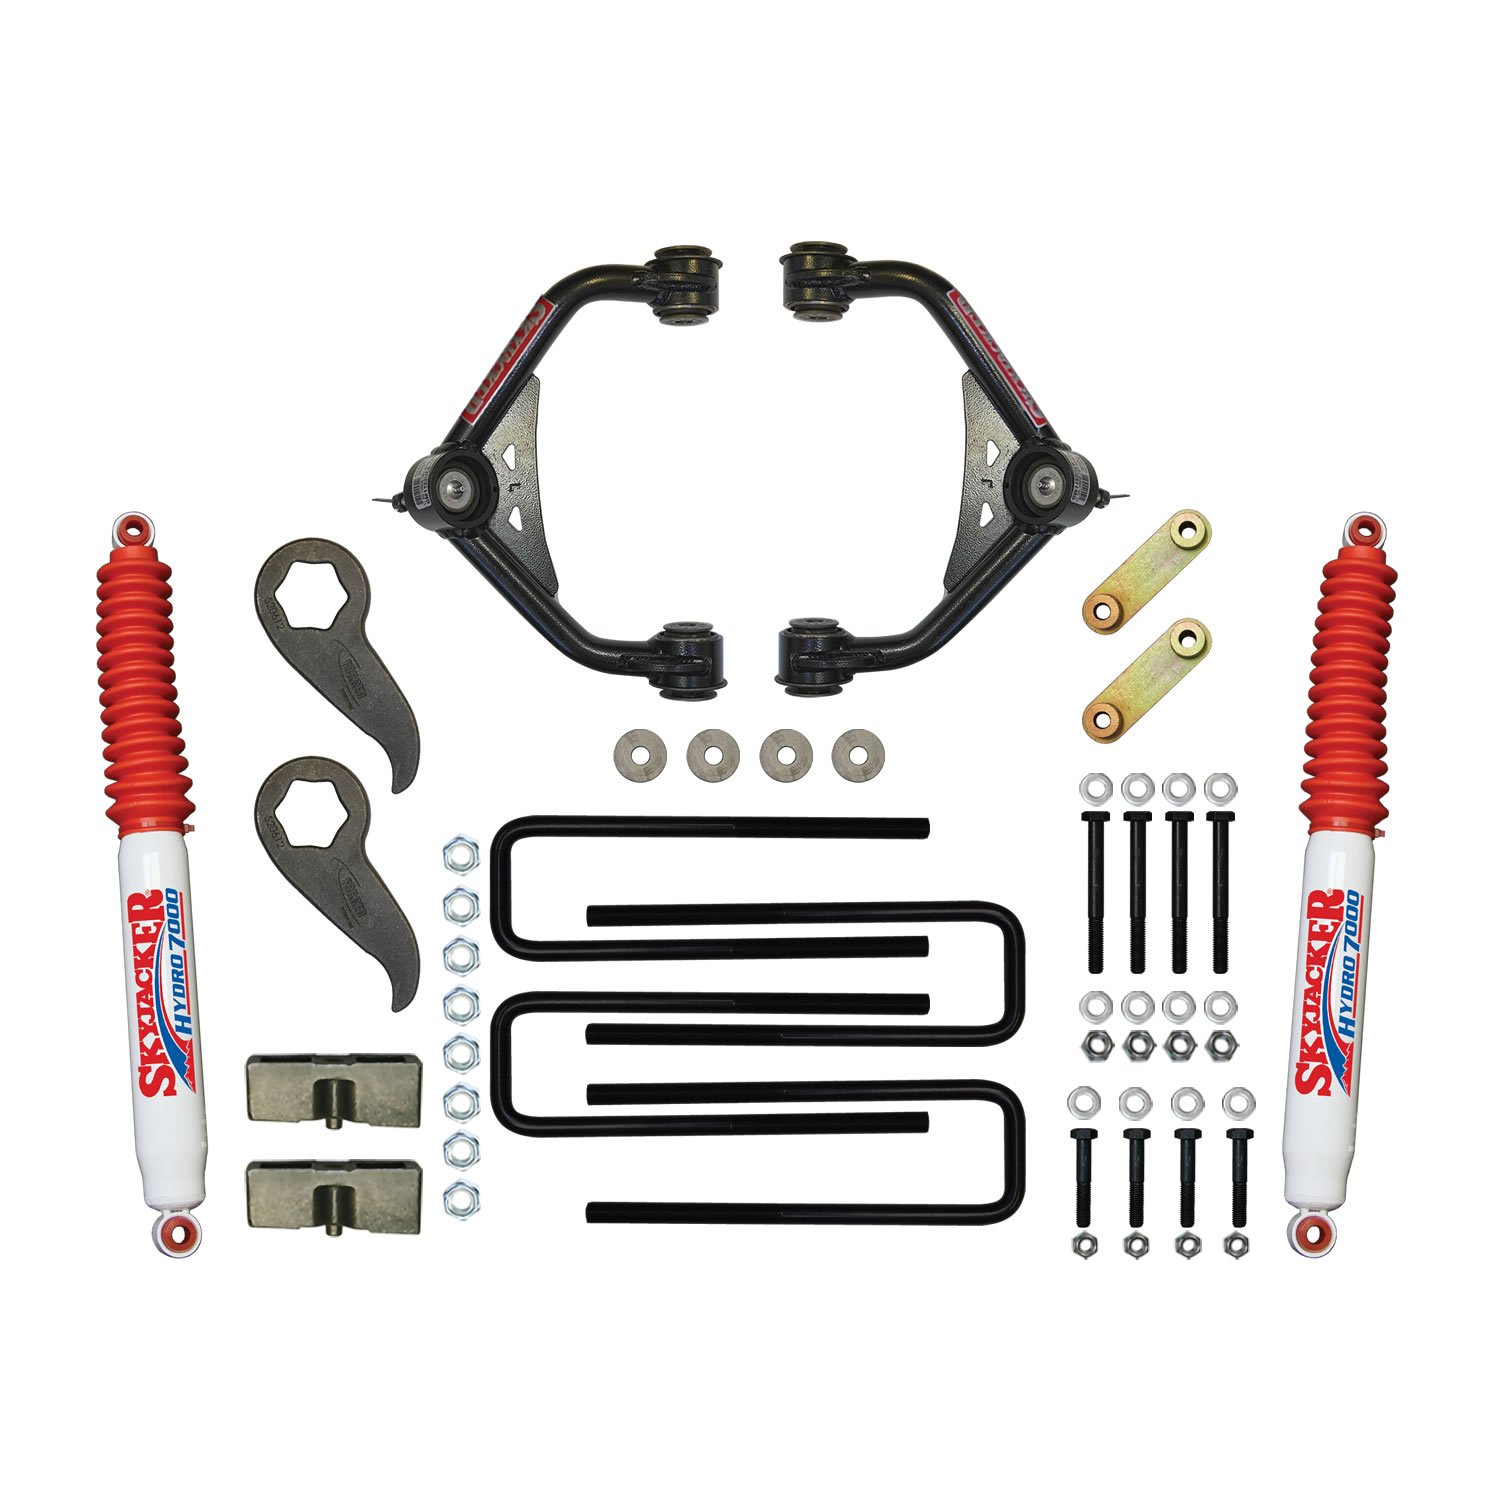 3.000-3.500 In. Upper Control Arm Lift Kit with Hydro 7000 Shocks for 2011-2019 GM HD Trucks